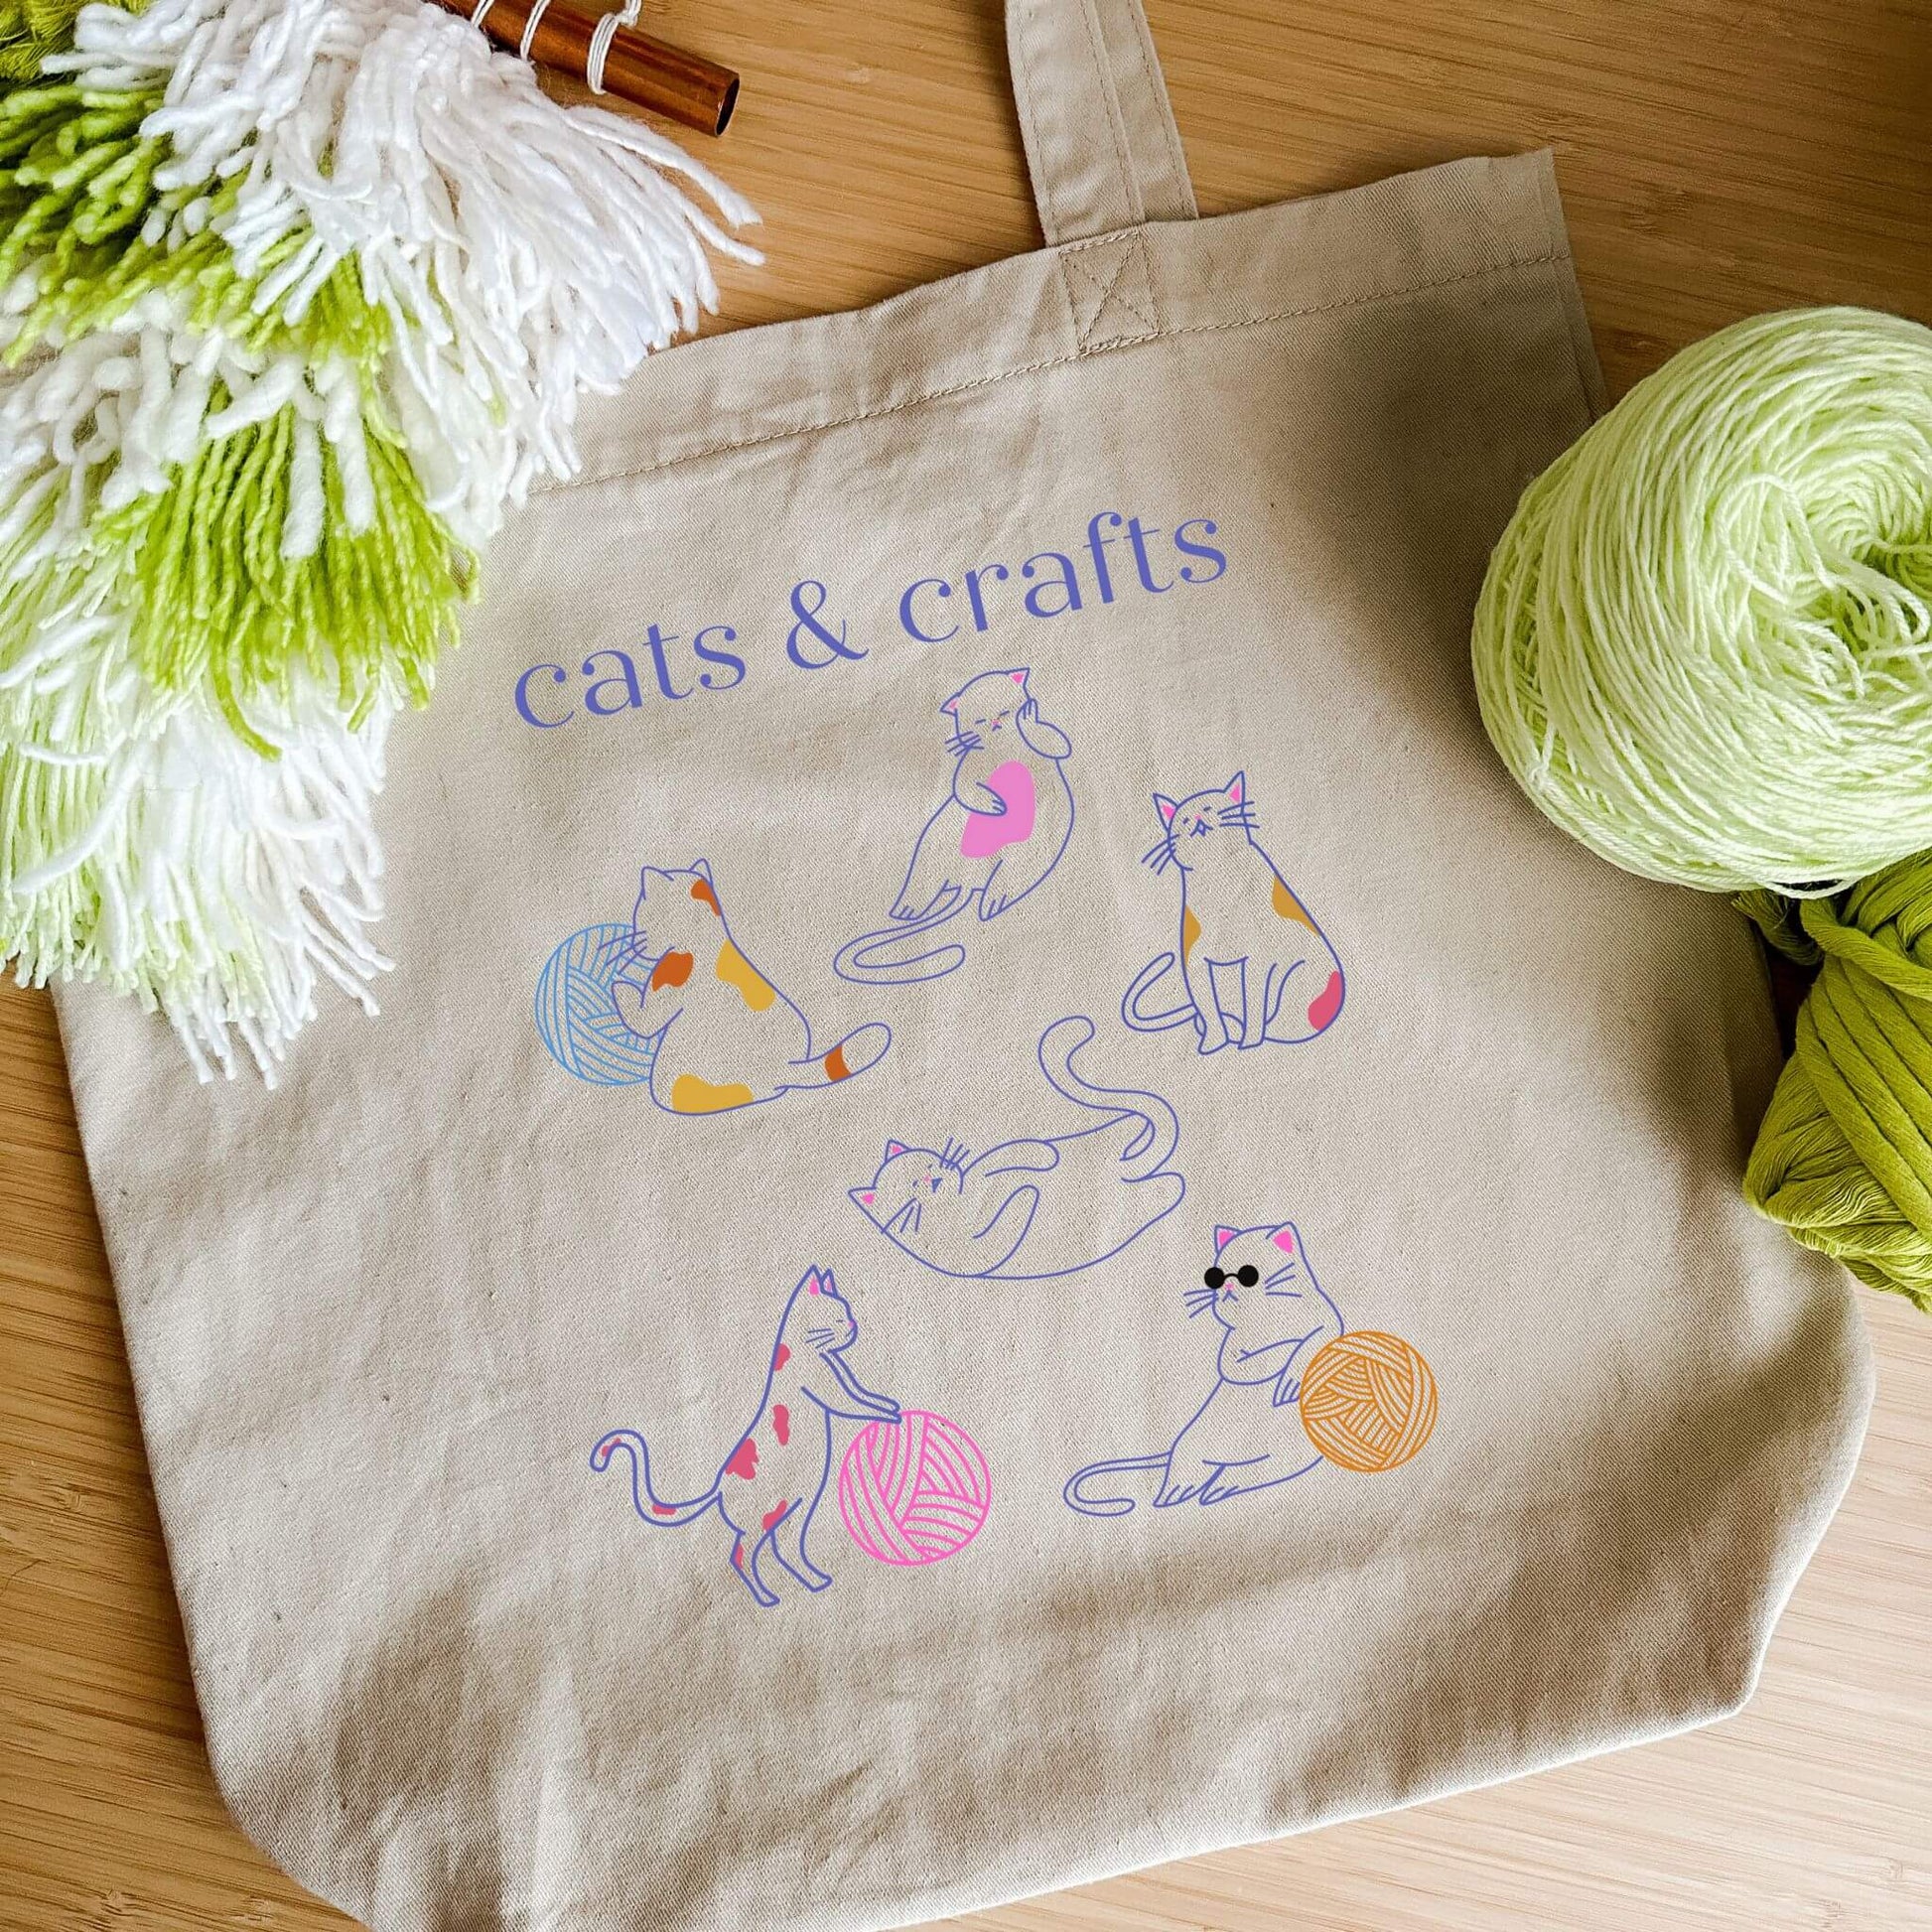 cats and crafts tote bag - wear and woven